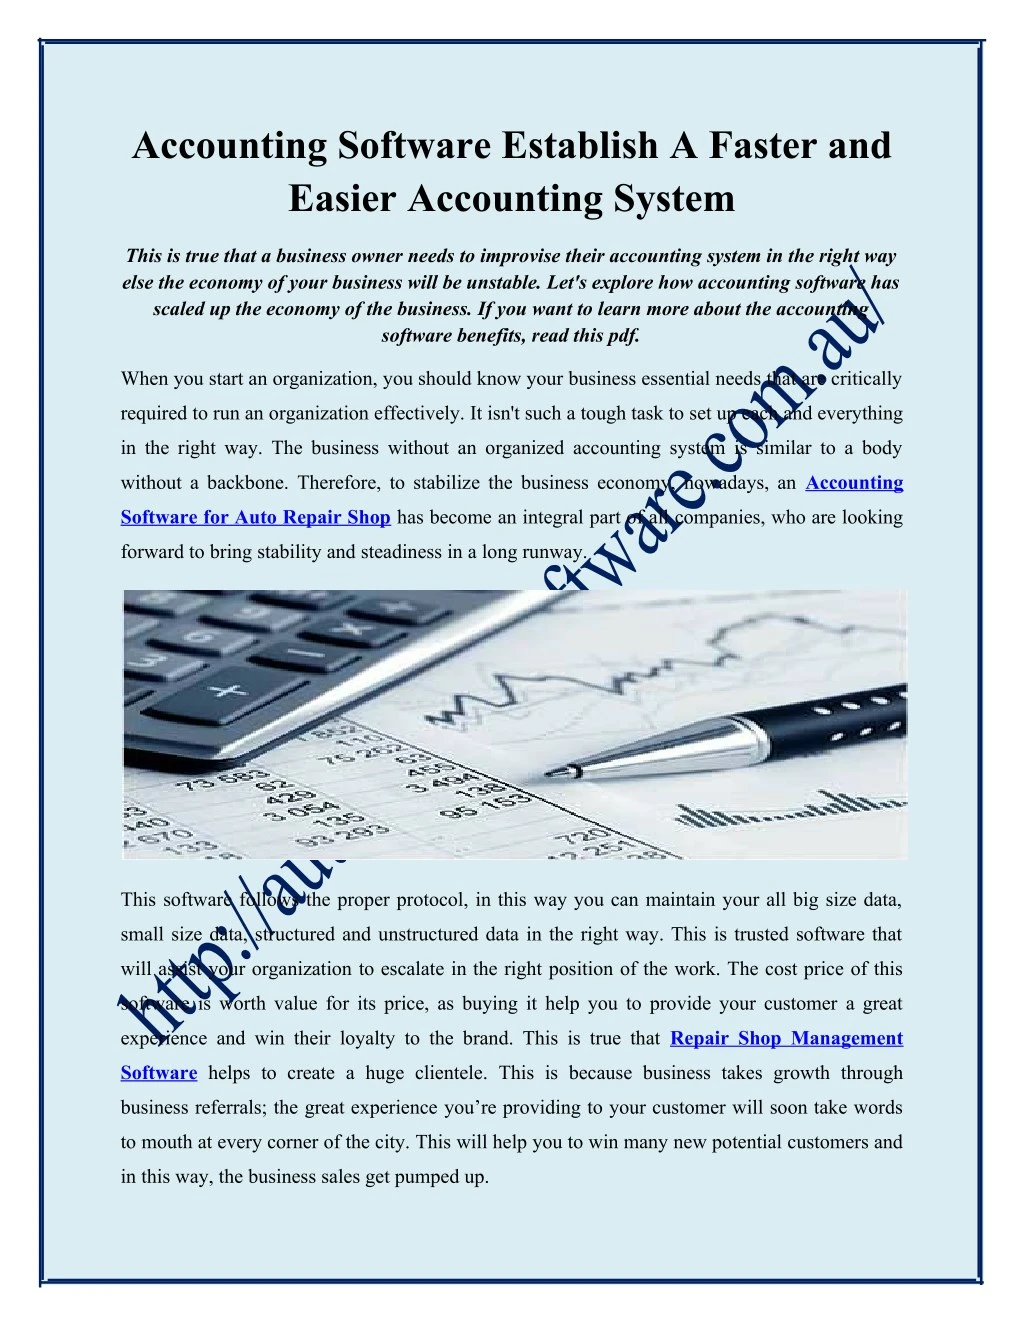 accounting software establish a faster and easier